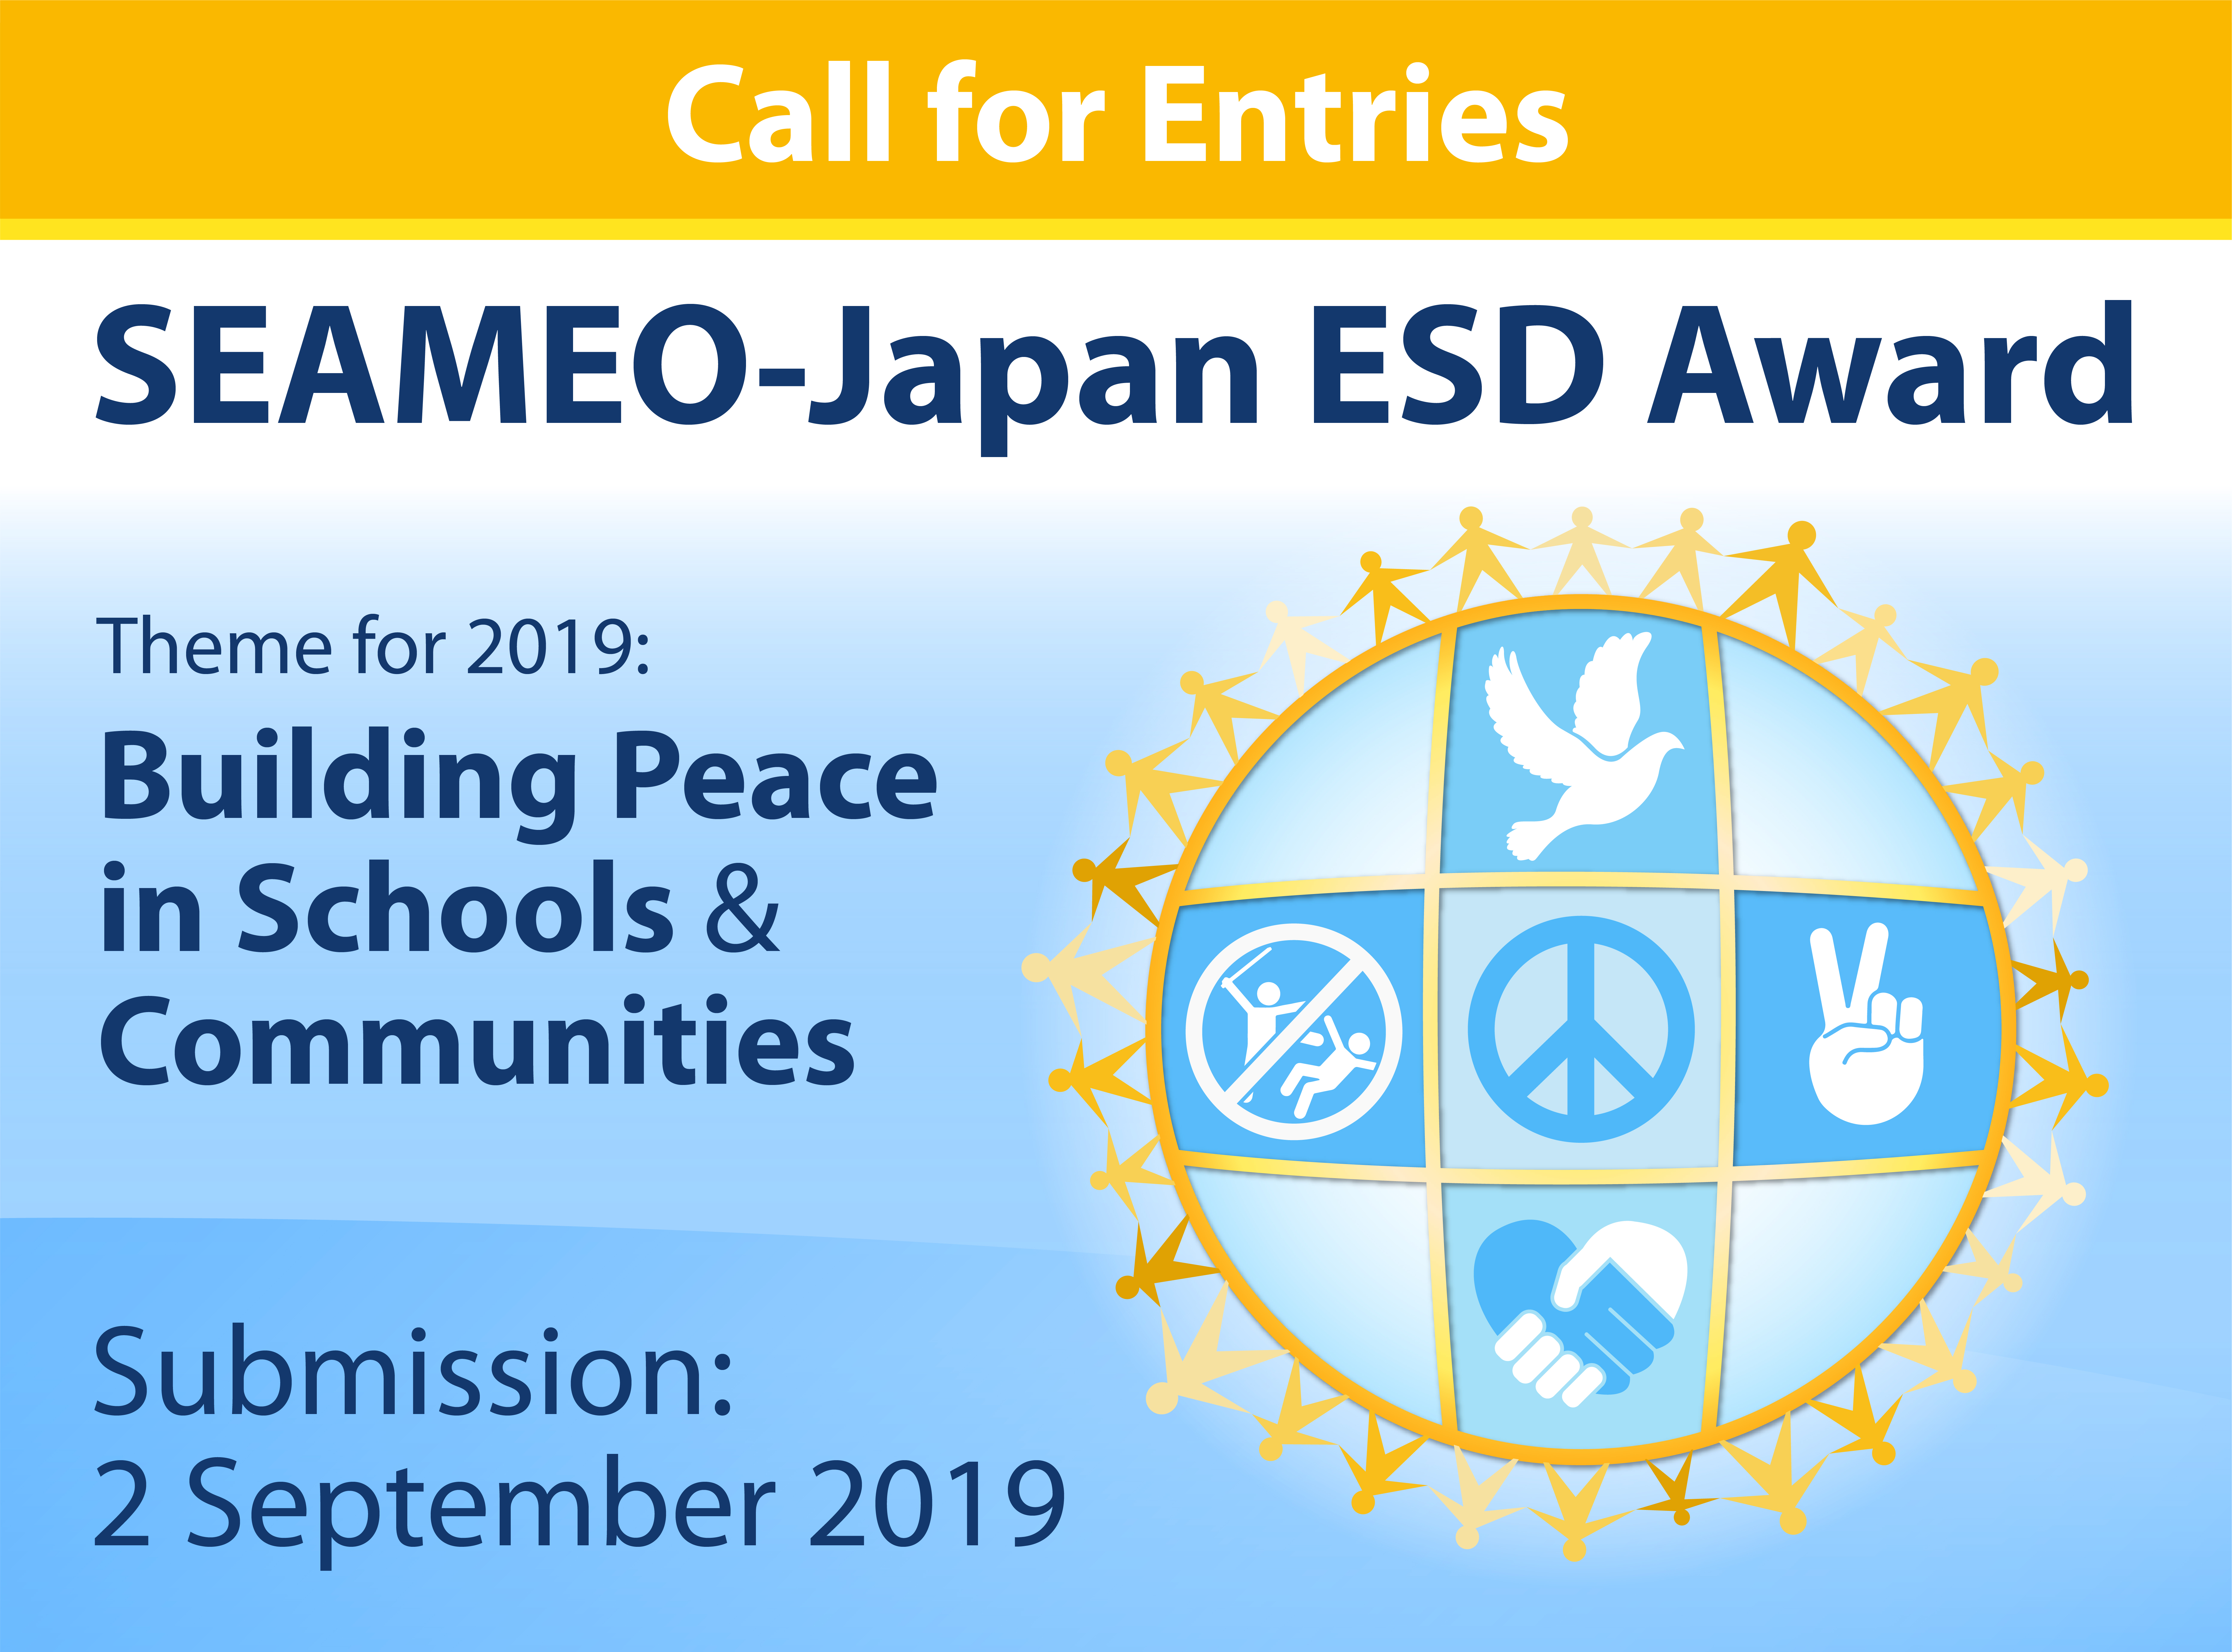 Announcement of the 2019 SEAMEO-Japan ESD Award, Theme: Building Peace in Schools and Communities